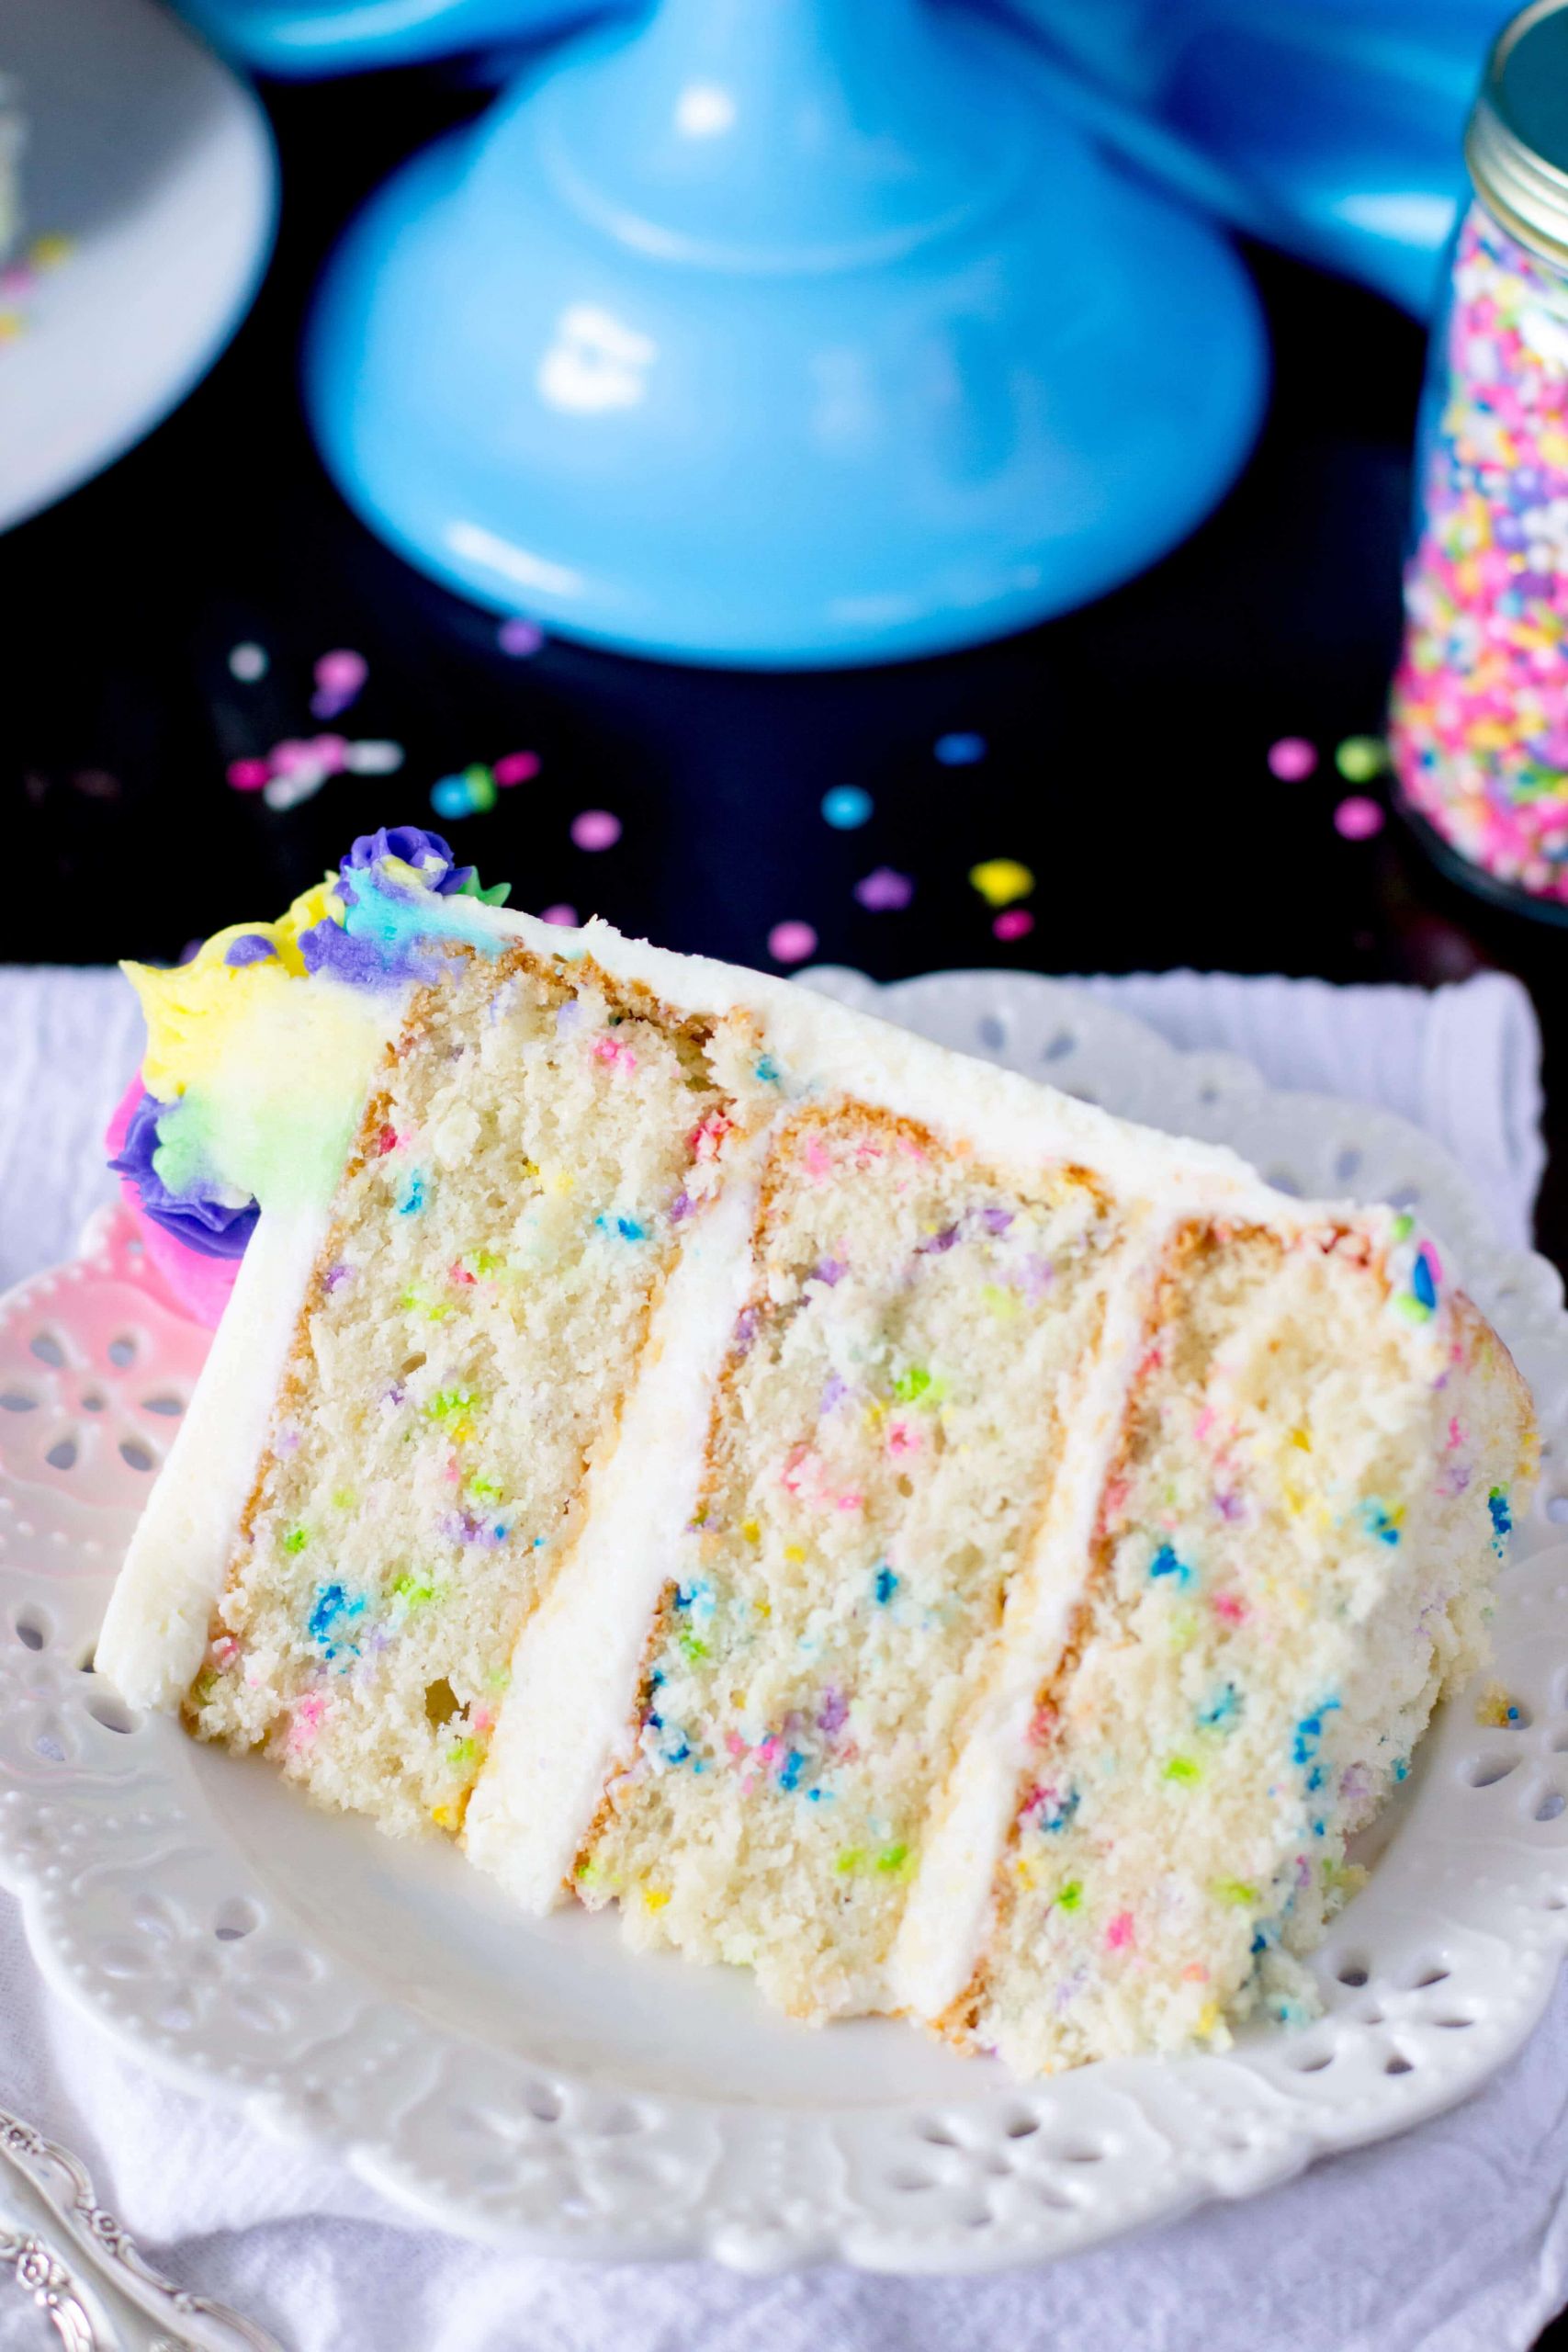 The Best Birthday Cake Recipes From Scratch - BirthDay Cake Recipes From Scratch Best Of Funfetti Cake From Scratch Amp A Very Merry UnbirthDay Of BirthDay Cake Recipes From Scratch ScaleD